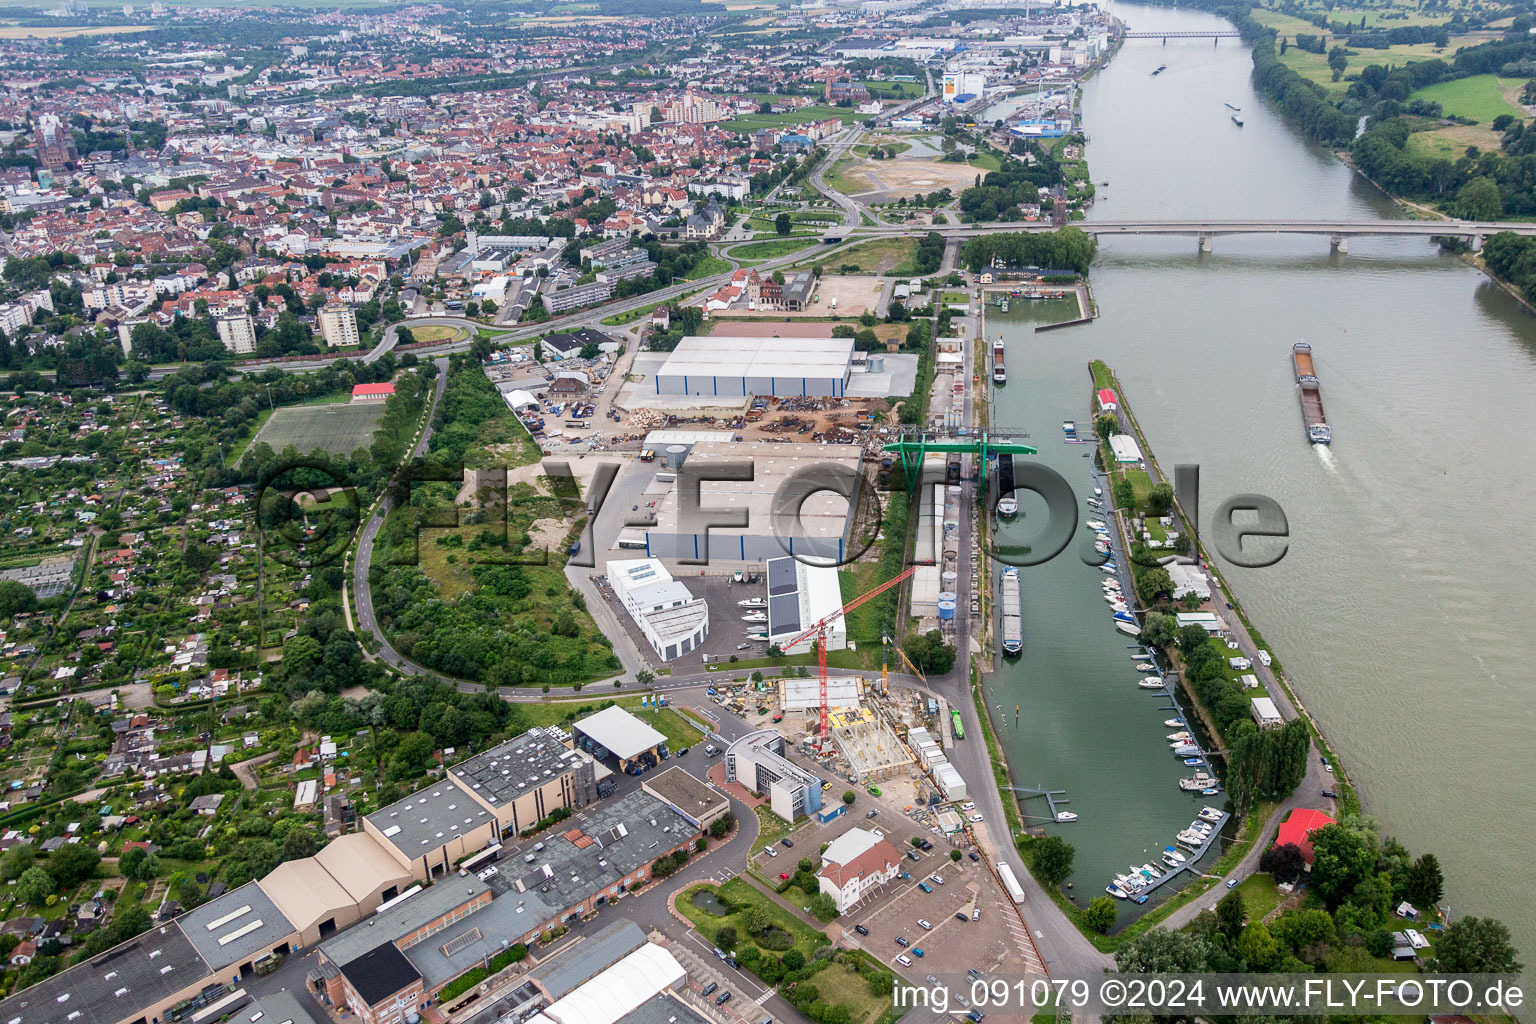 Quays and boat moorings at the port of the inland port Flosshafen on Rhein in Worms in the state Rhineland-Palatinate, Germany